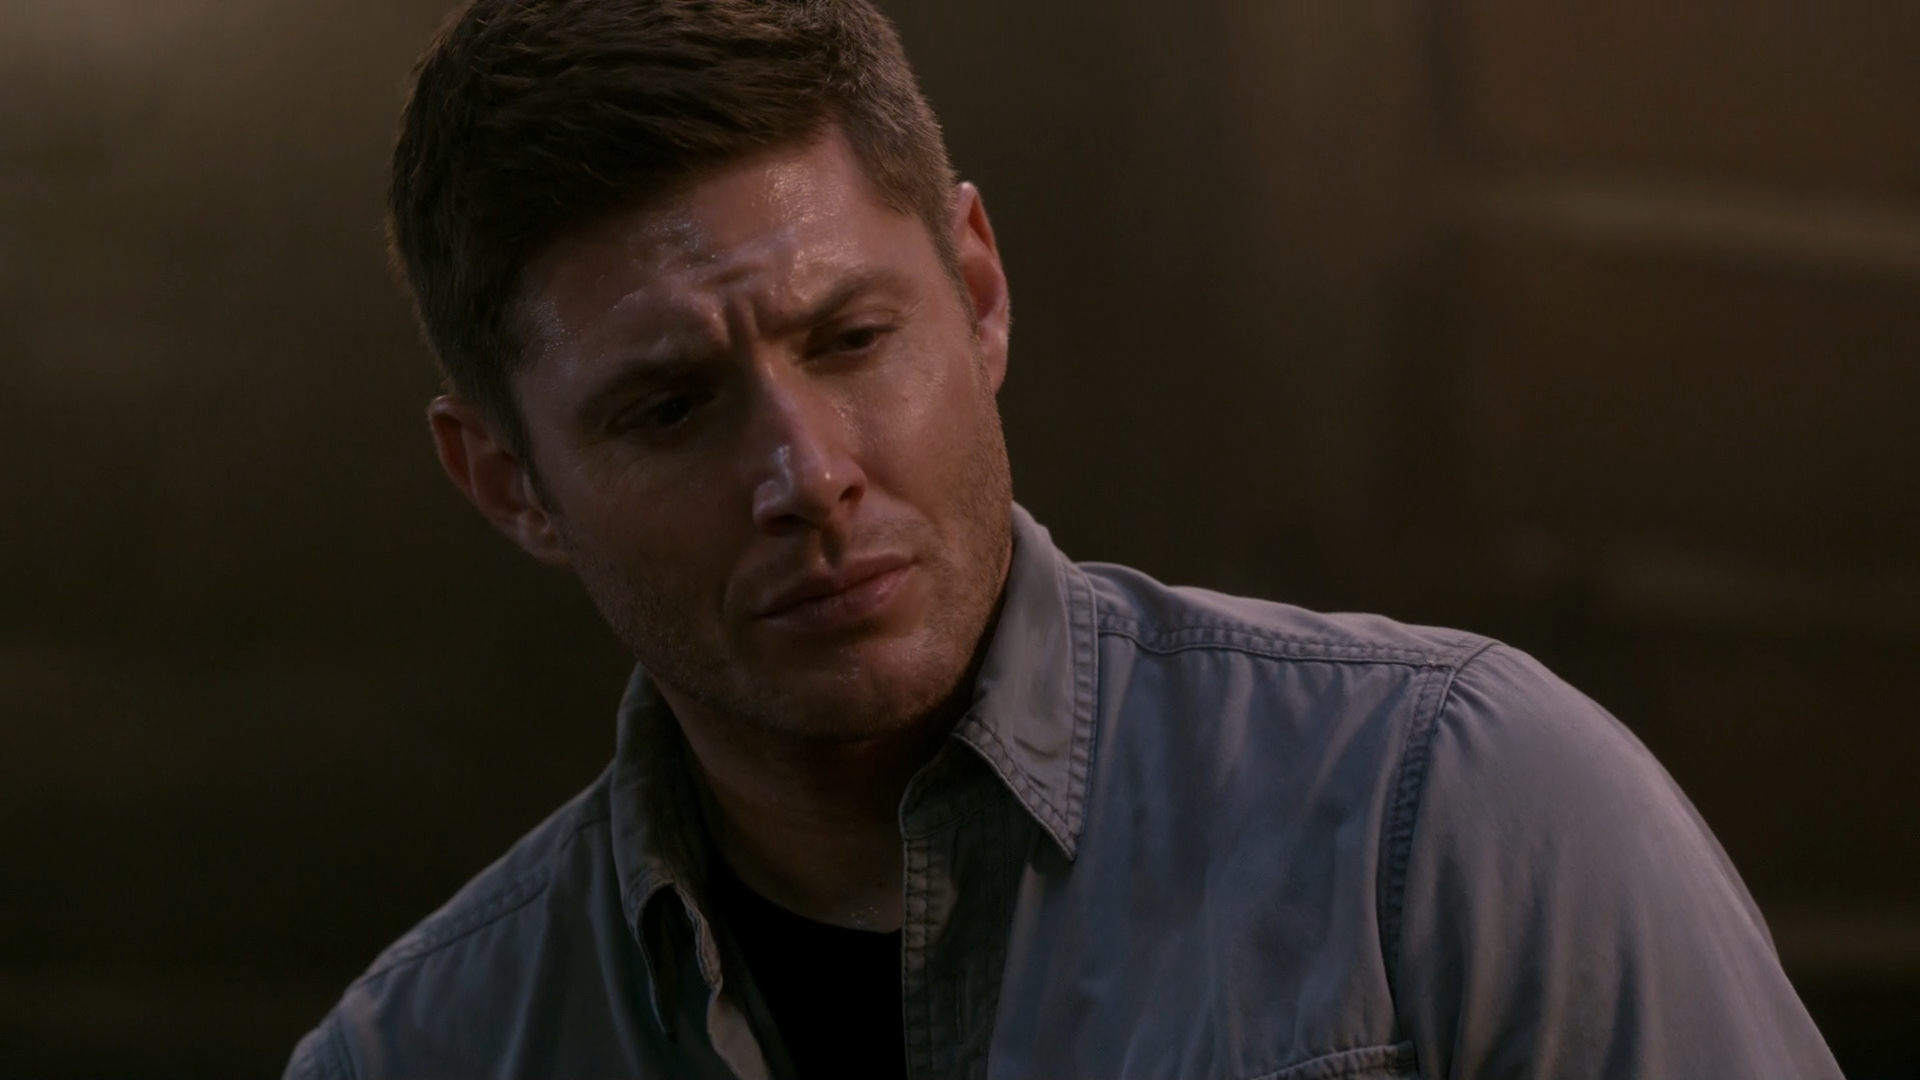 They carry he. Supernatural 10x19. Supernatural 10x15 фото. Supernatural 10x17 фото. Supernatural 10x16 фото.